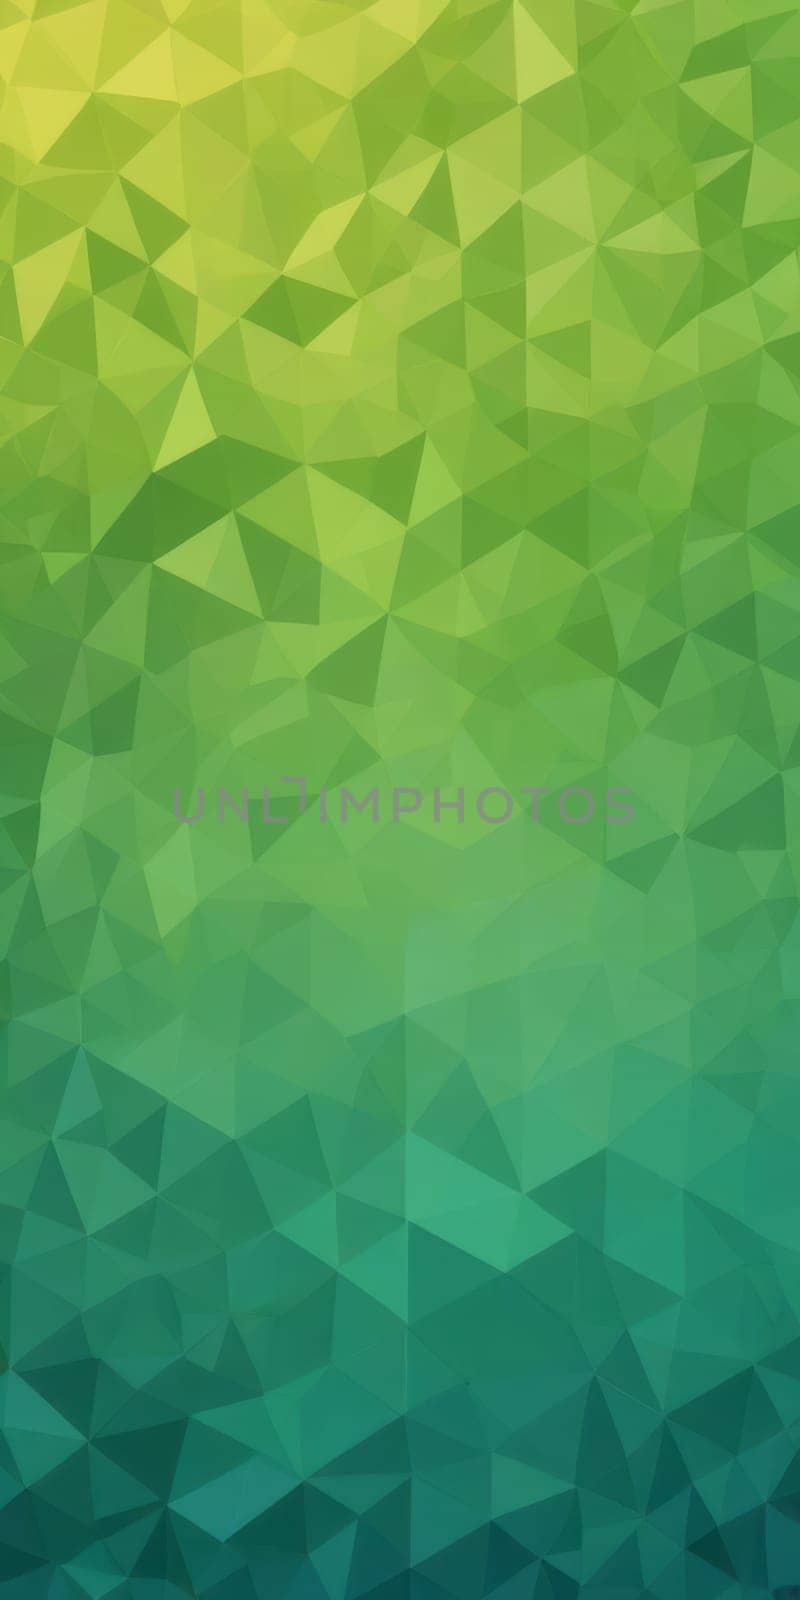 Pentagonal Shapes in Olive and Aquamarine by nkotlyar